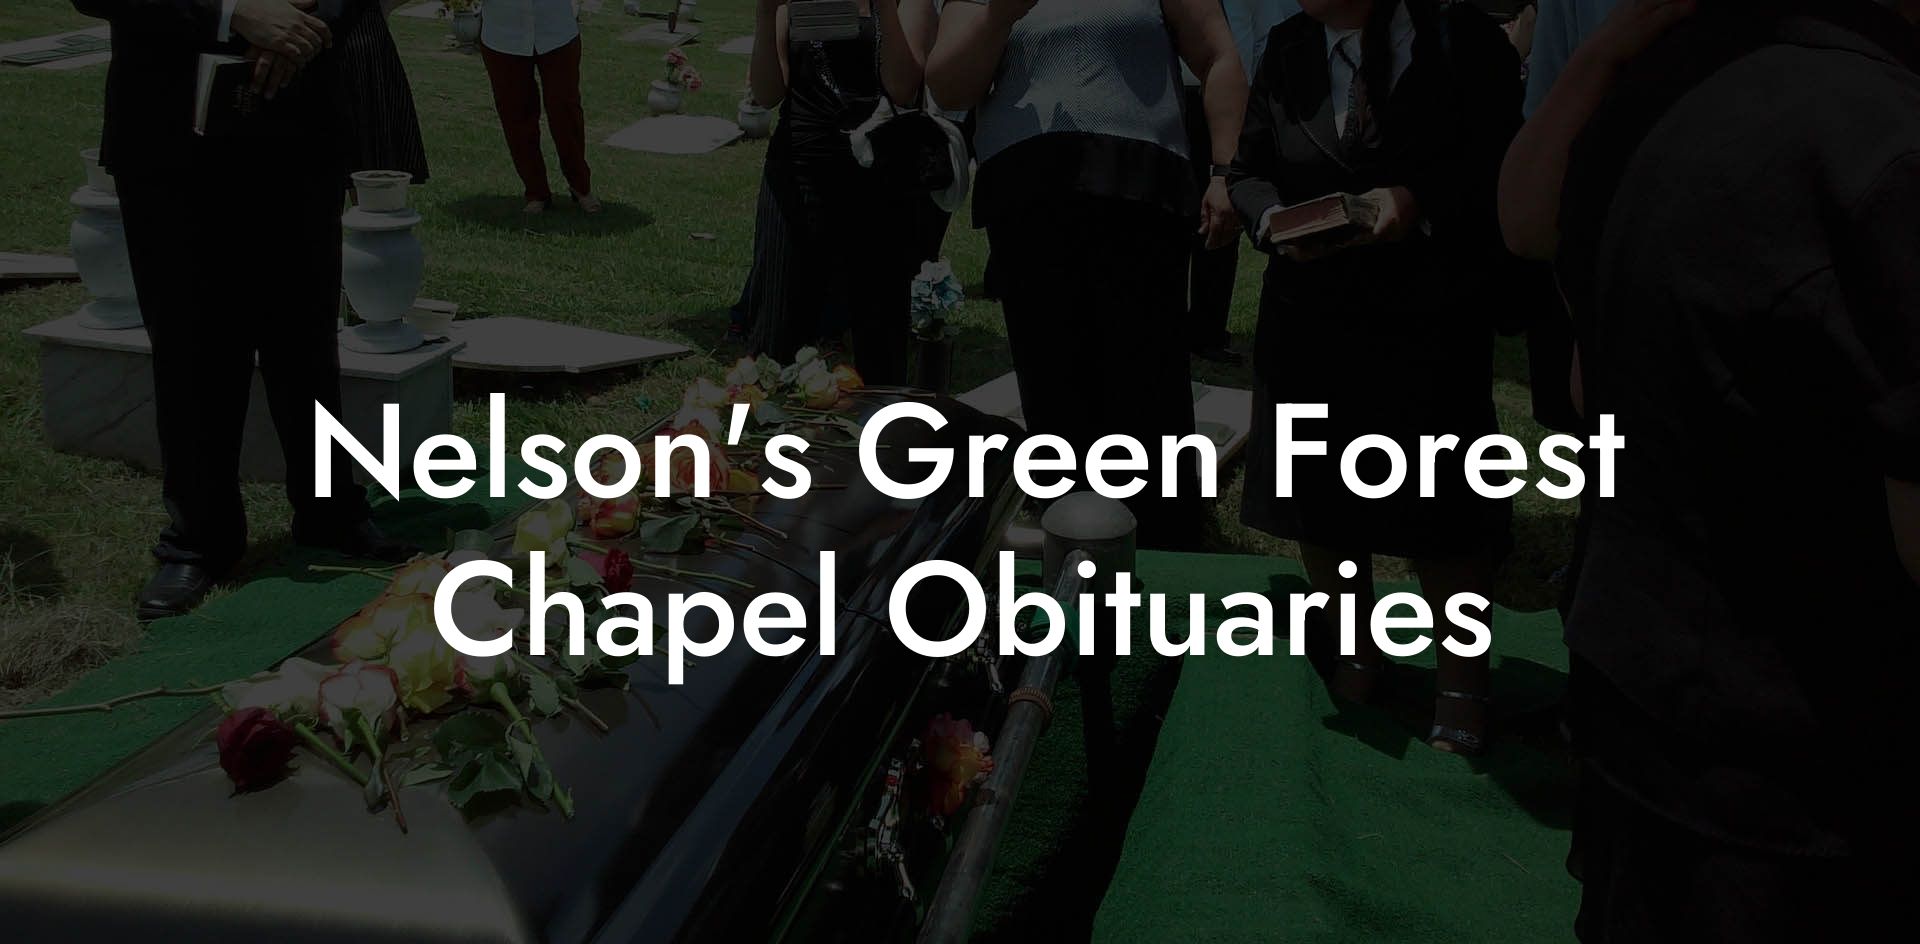 Nelson's Green Forest Chapel Obituaries